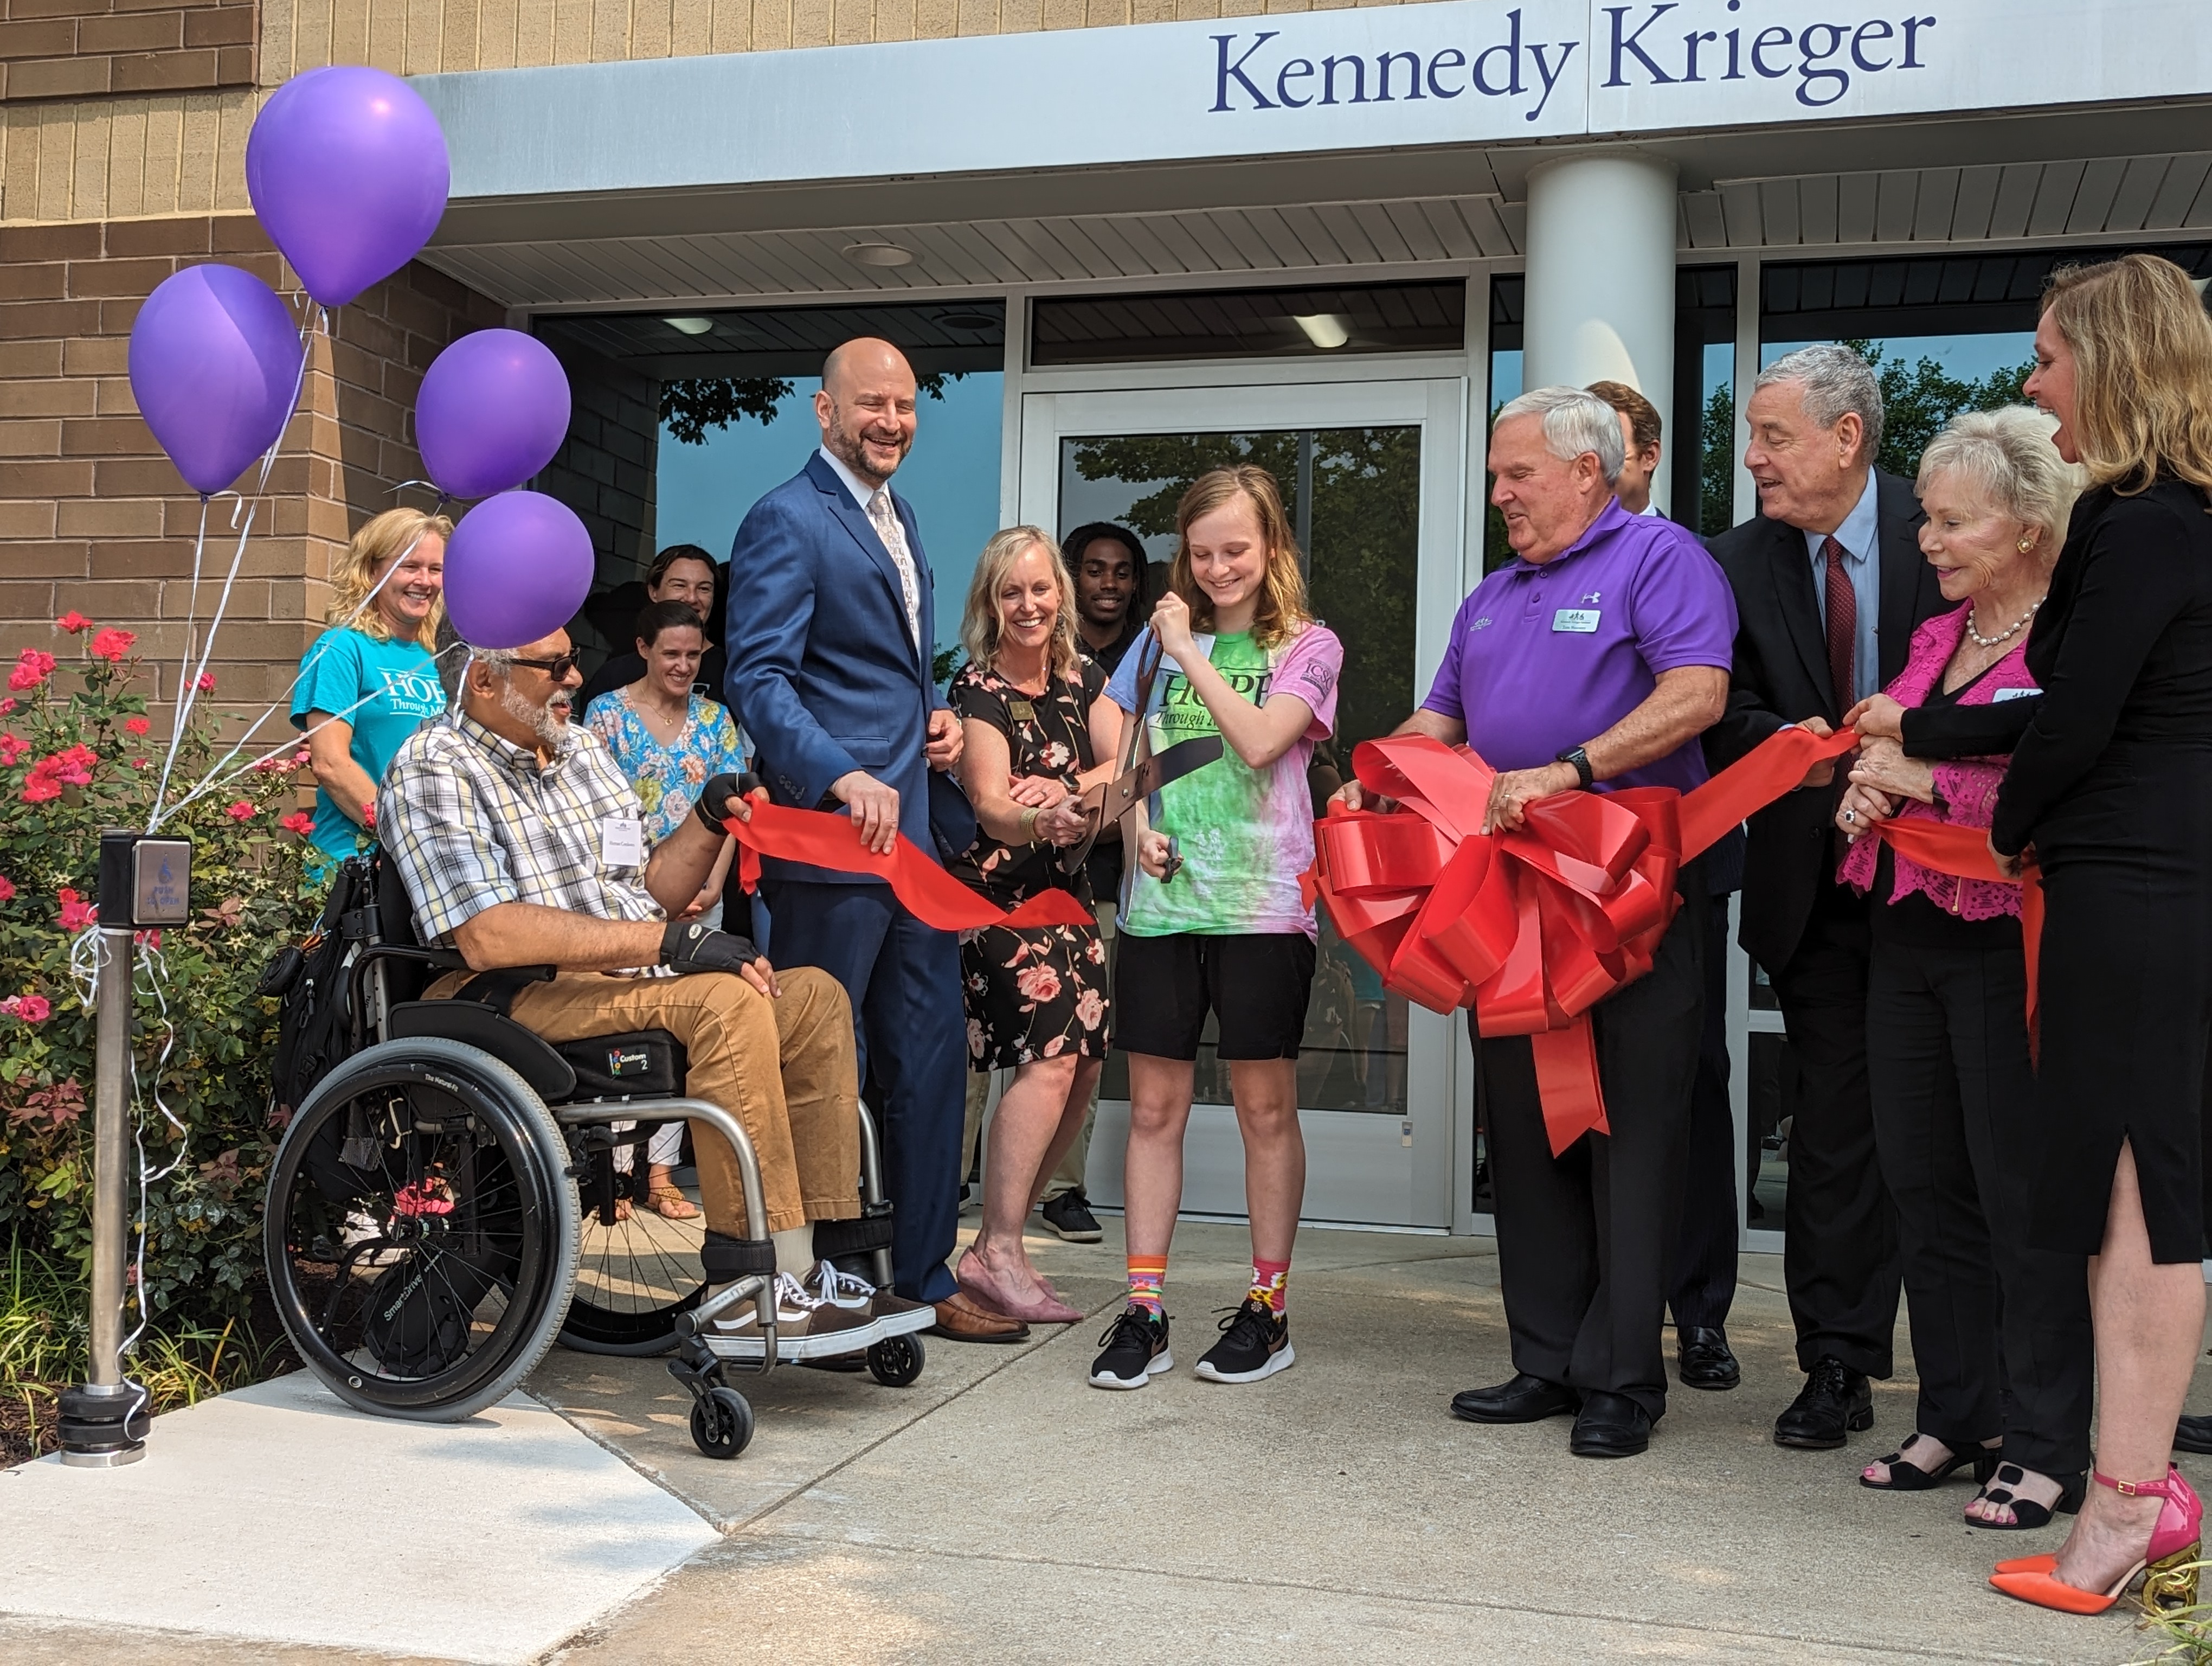 A group of people gathering around a young girl as she cuts a red ribbon to open the International Center for Spinal Cord Injury's White Marsh location.